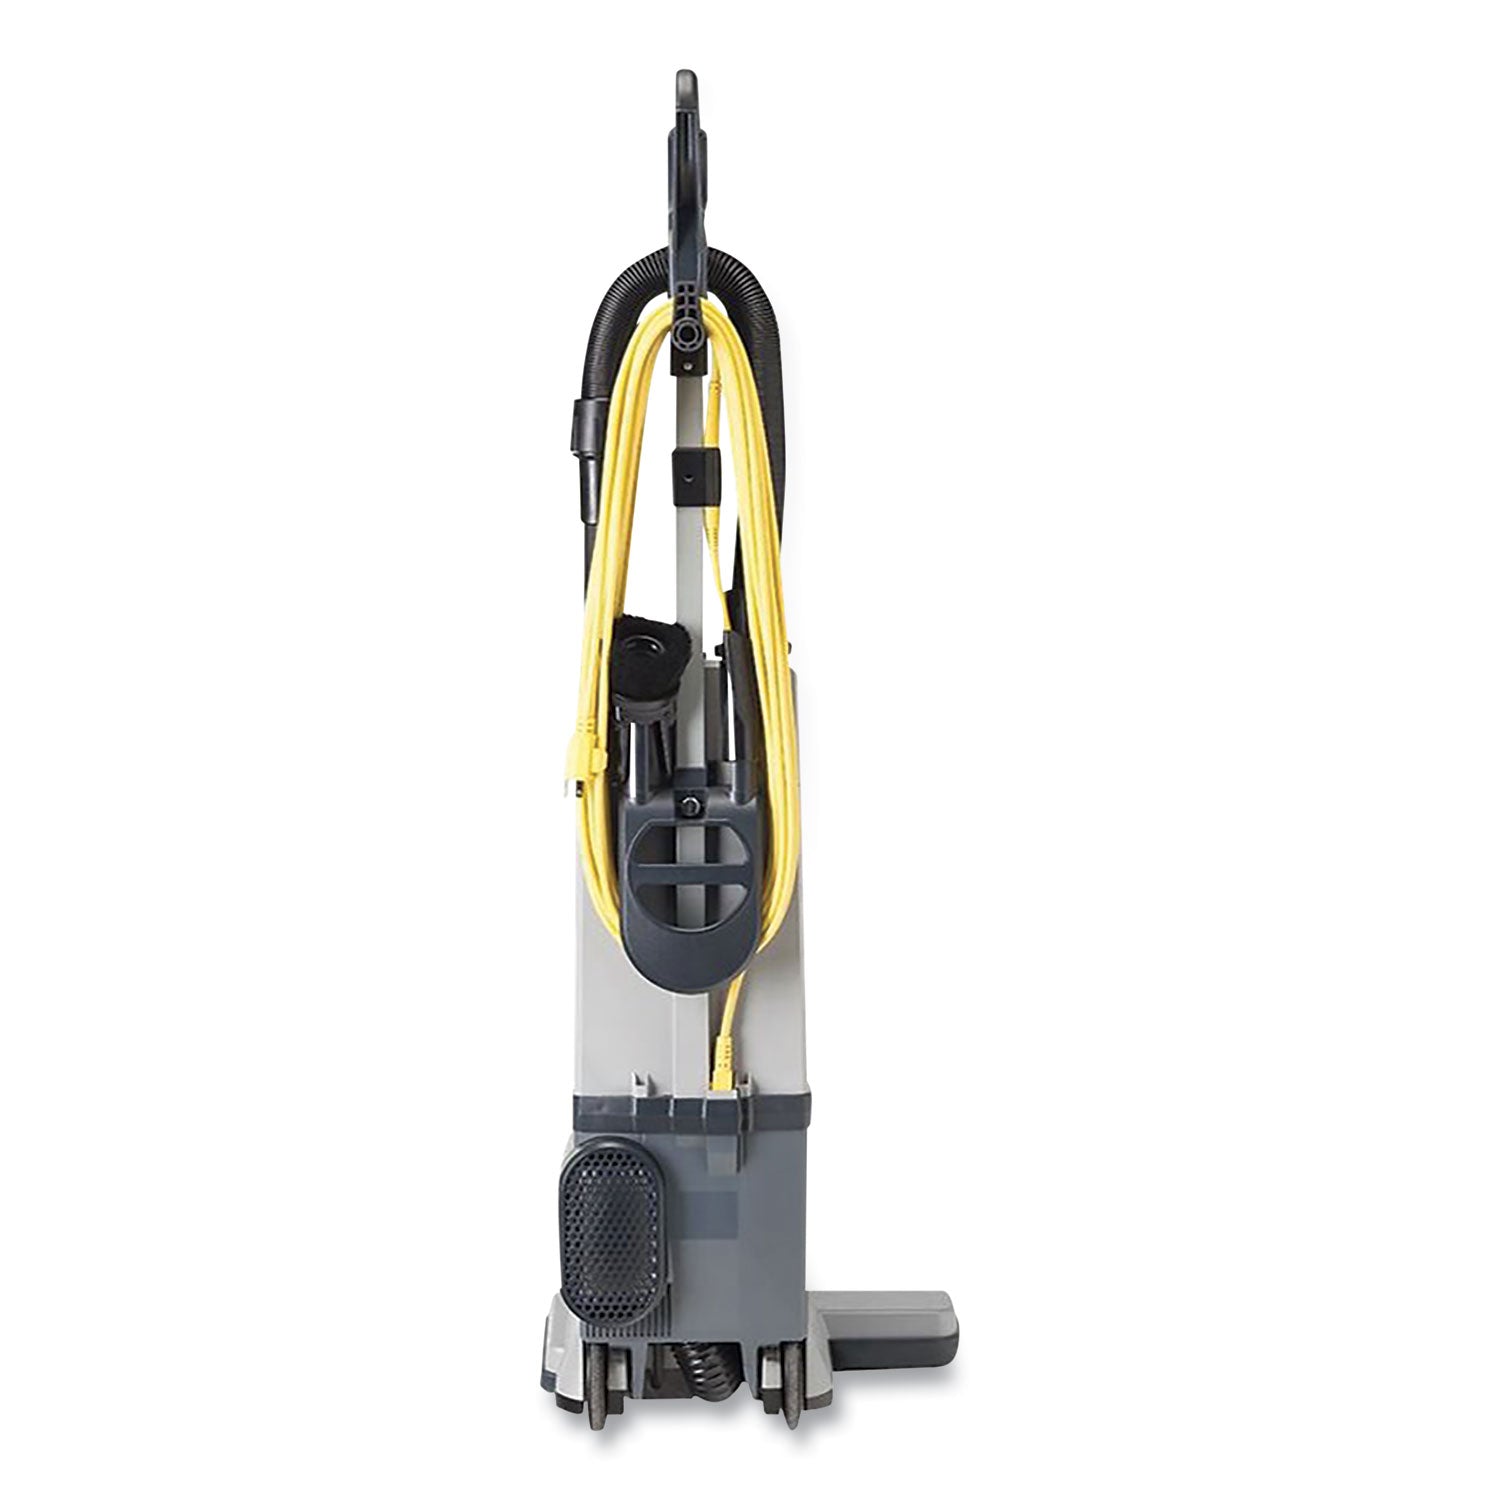 proforce-1500xp-upright-vacuum-15-cleaning-path-gray-black_ptm107252 - 2